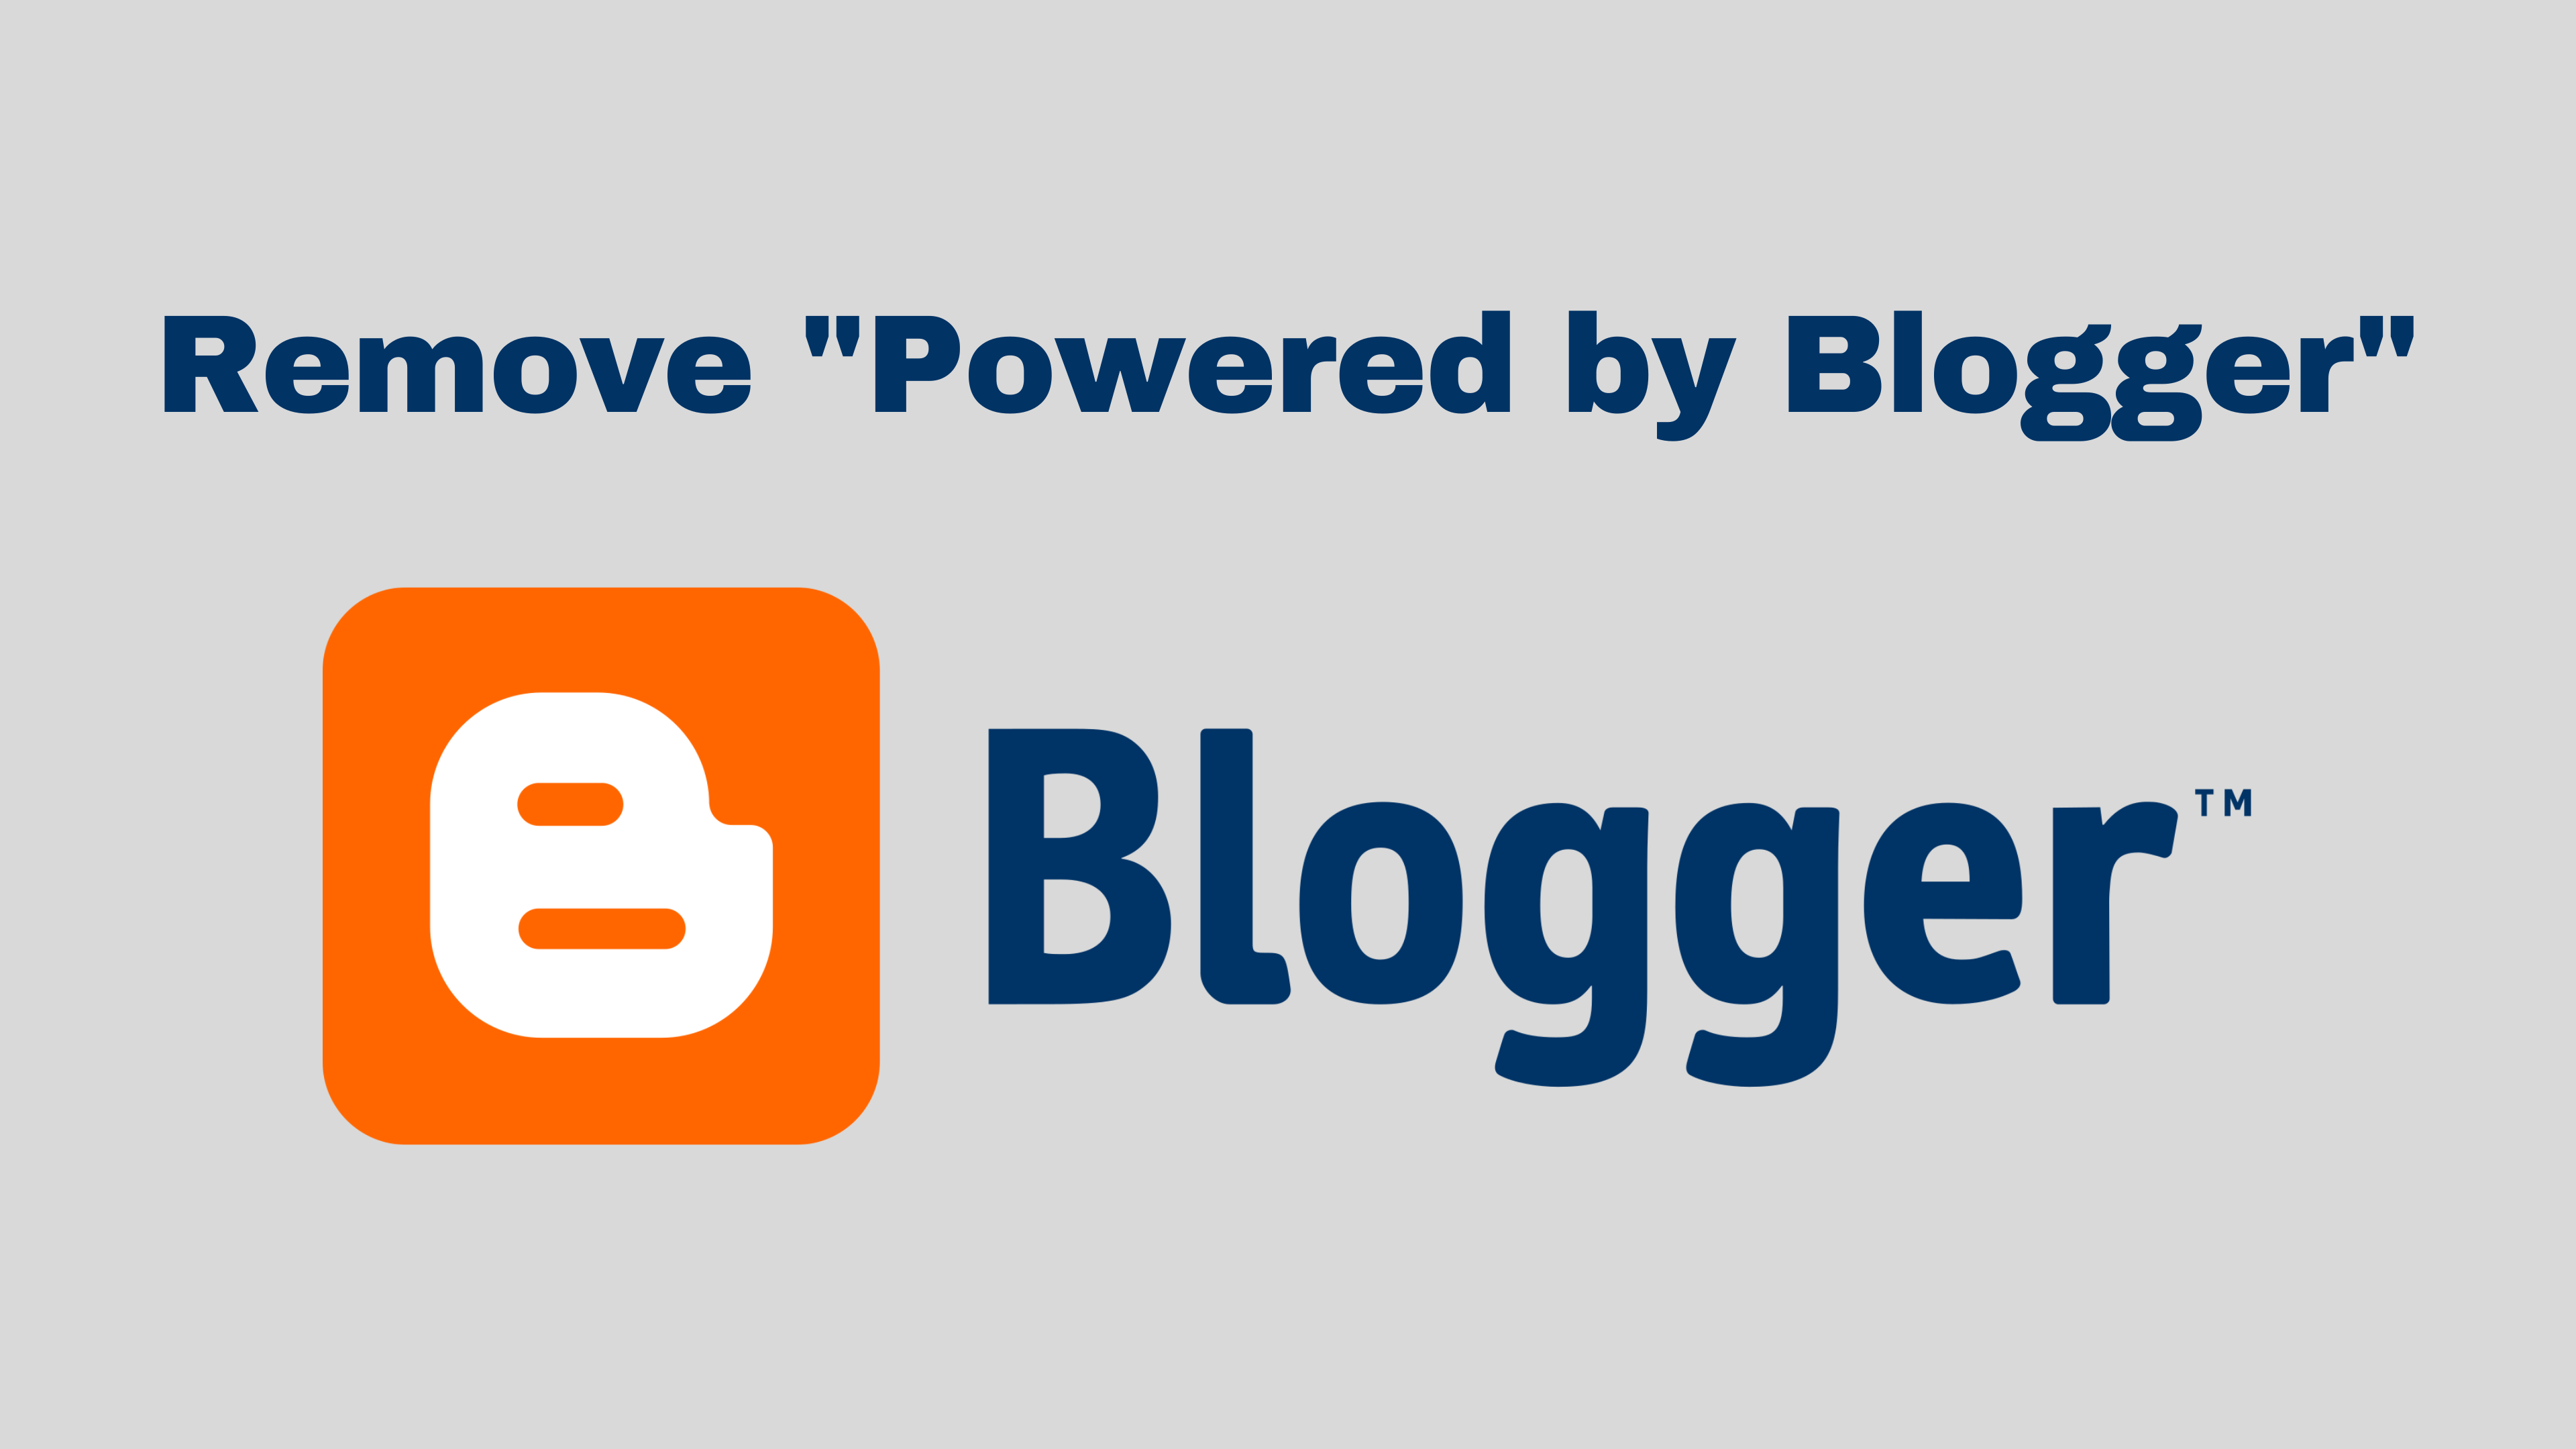 Remove "Powered by Blogger"